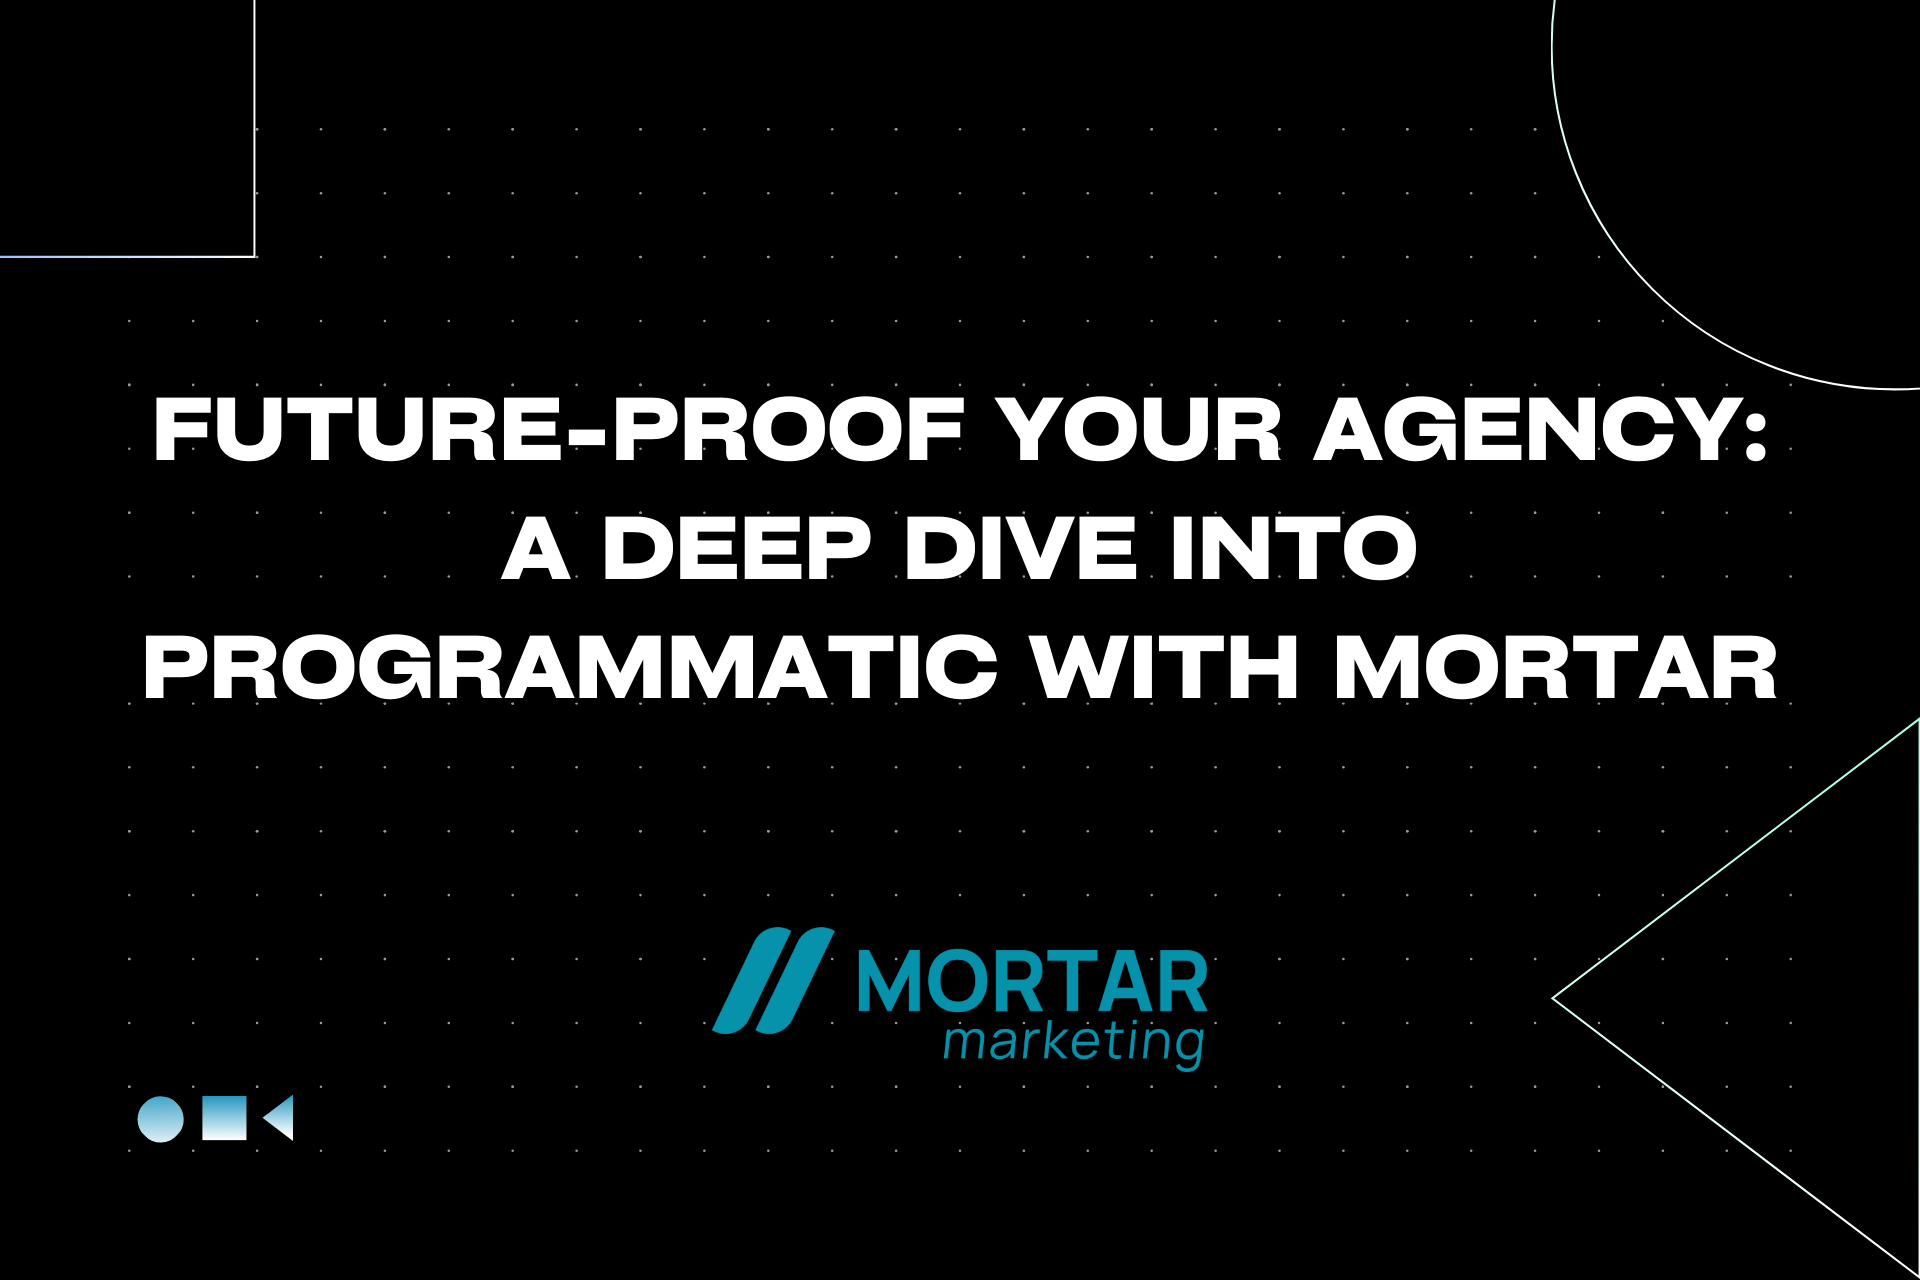 Future-Proof Your Agency: A Deep Dive into Programmatic with Mortar